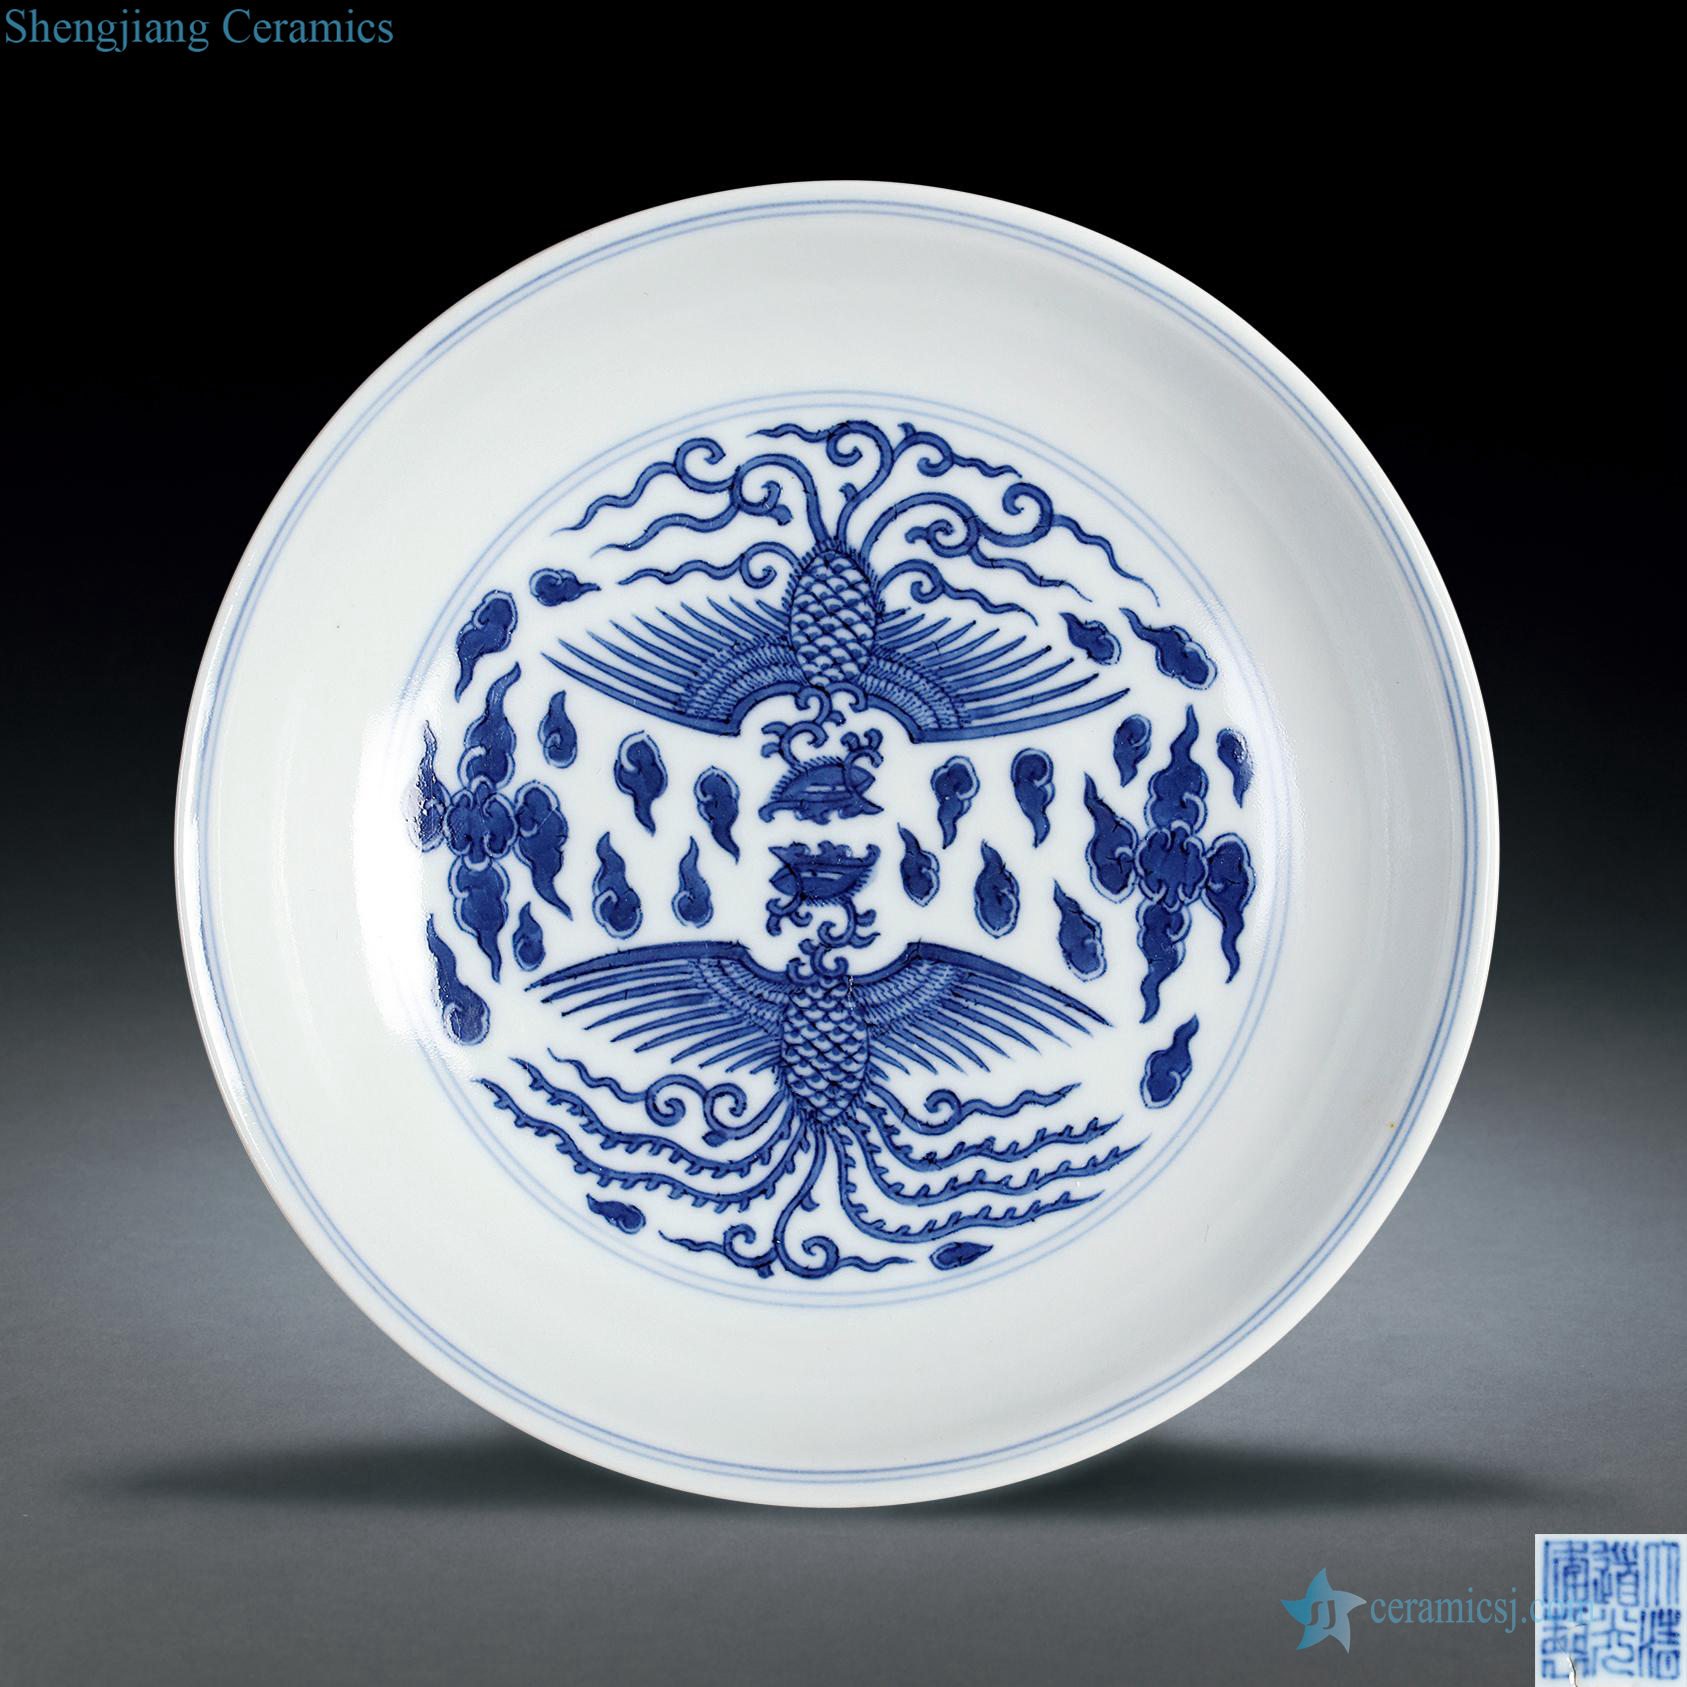 Qing daoguang Blue and white grain disc